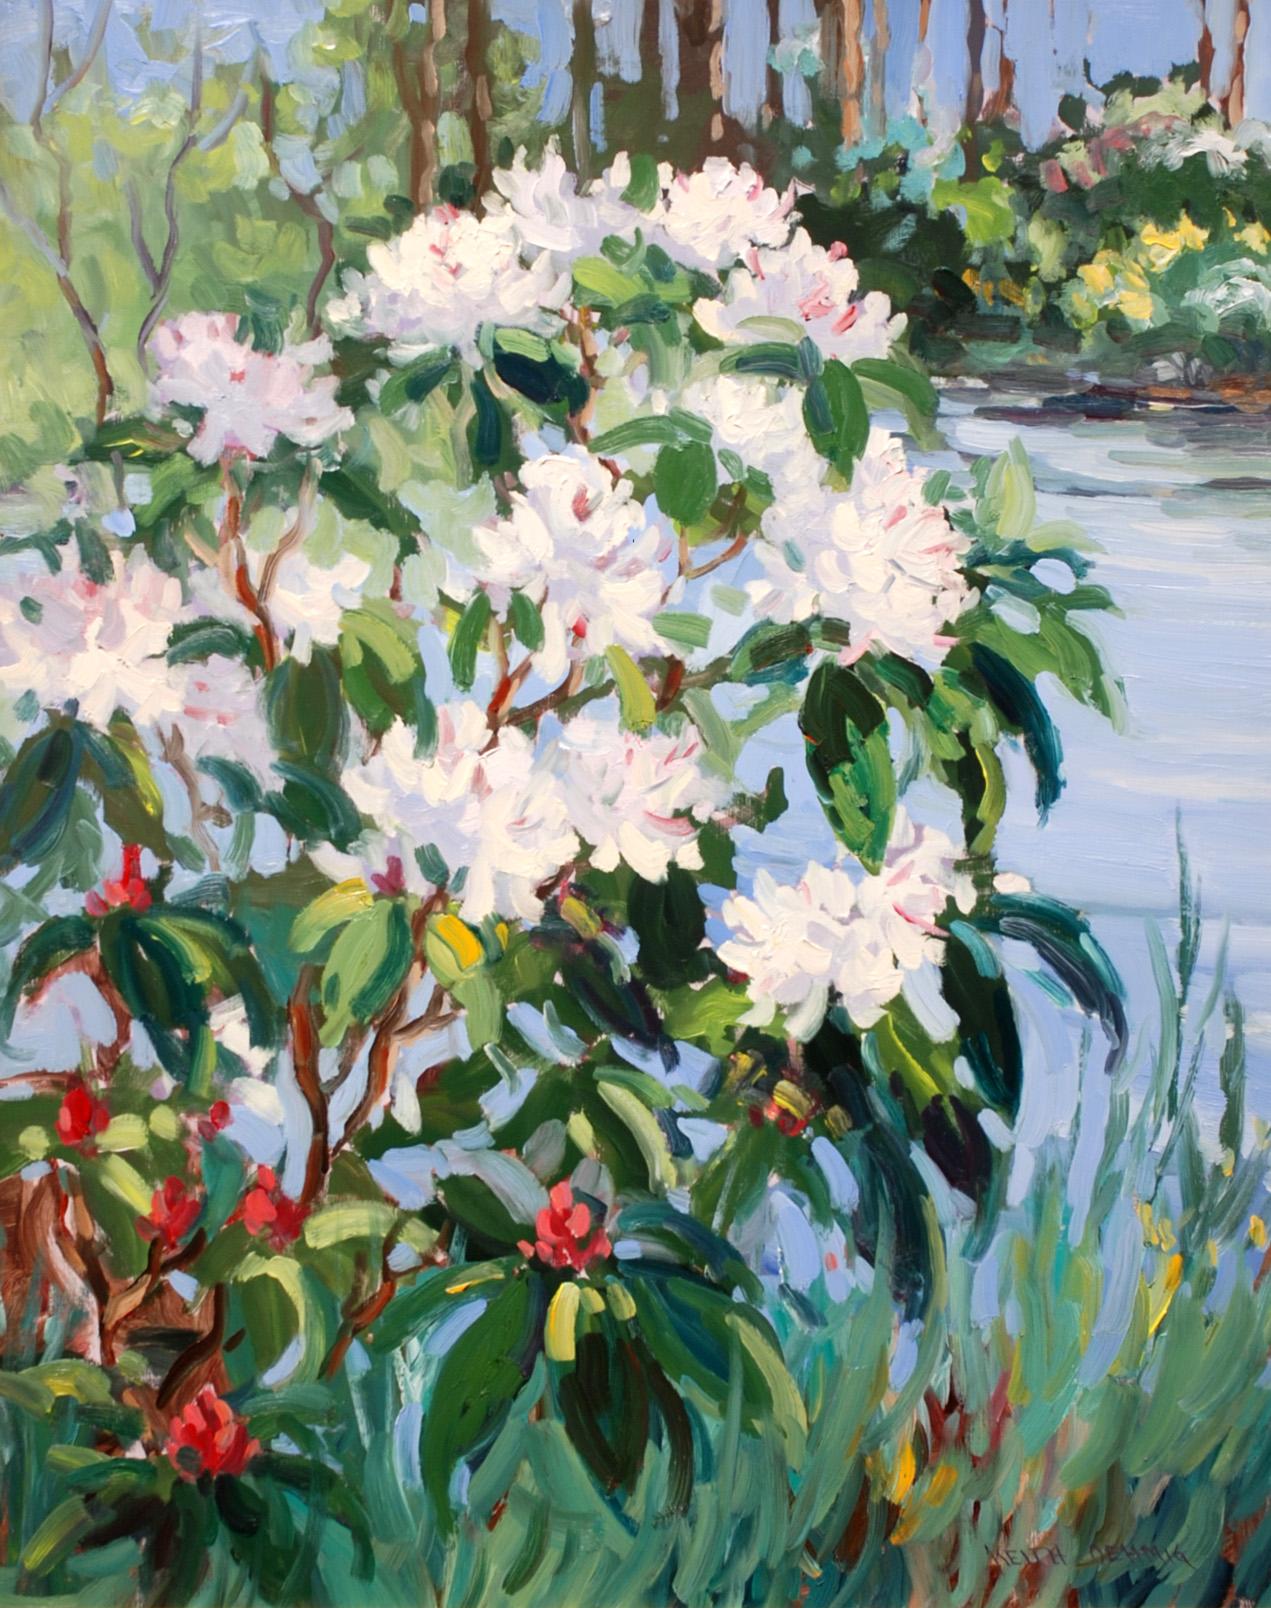 Keith Oehmig Landscape Painting - "Rhododendron on the Shore" contemporary impressionist landscape painting 